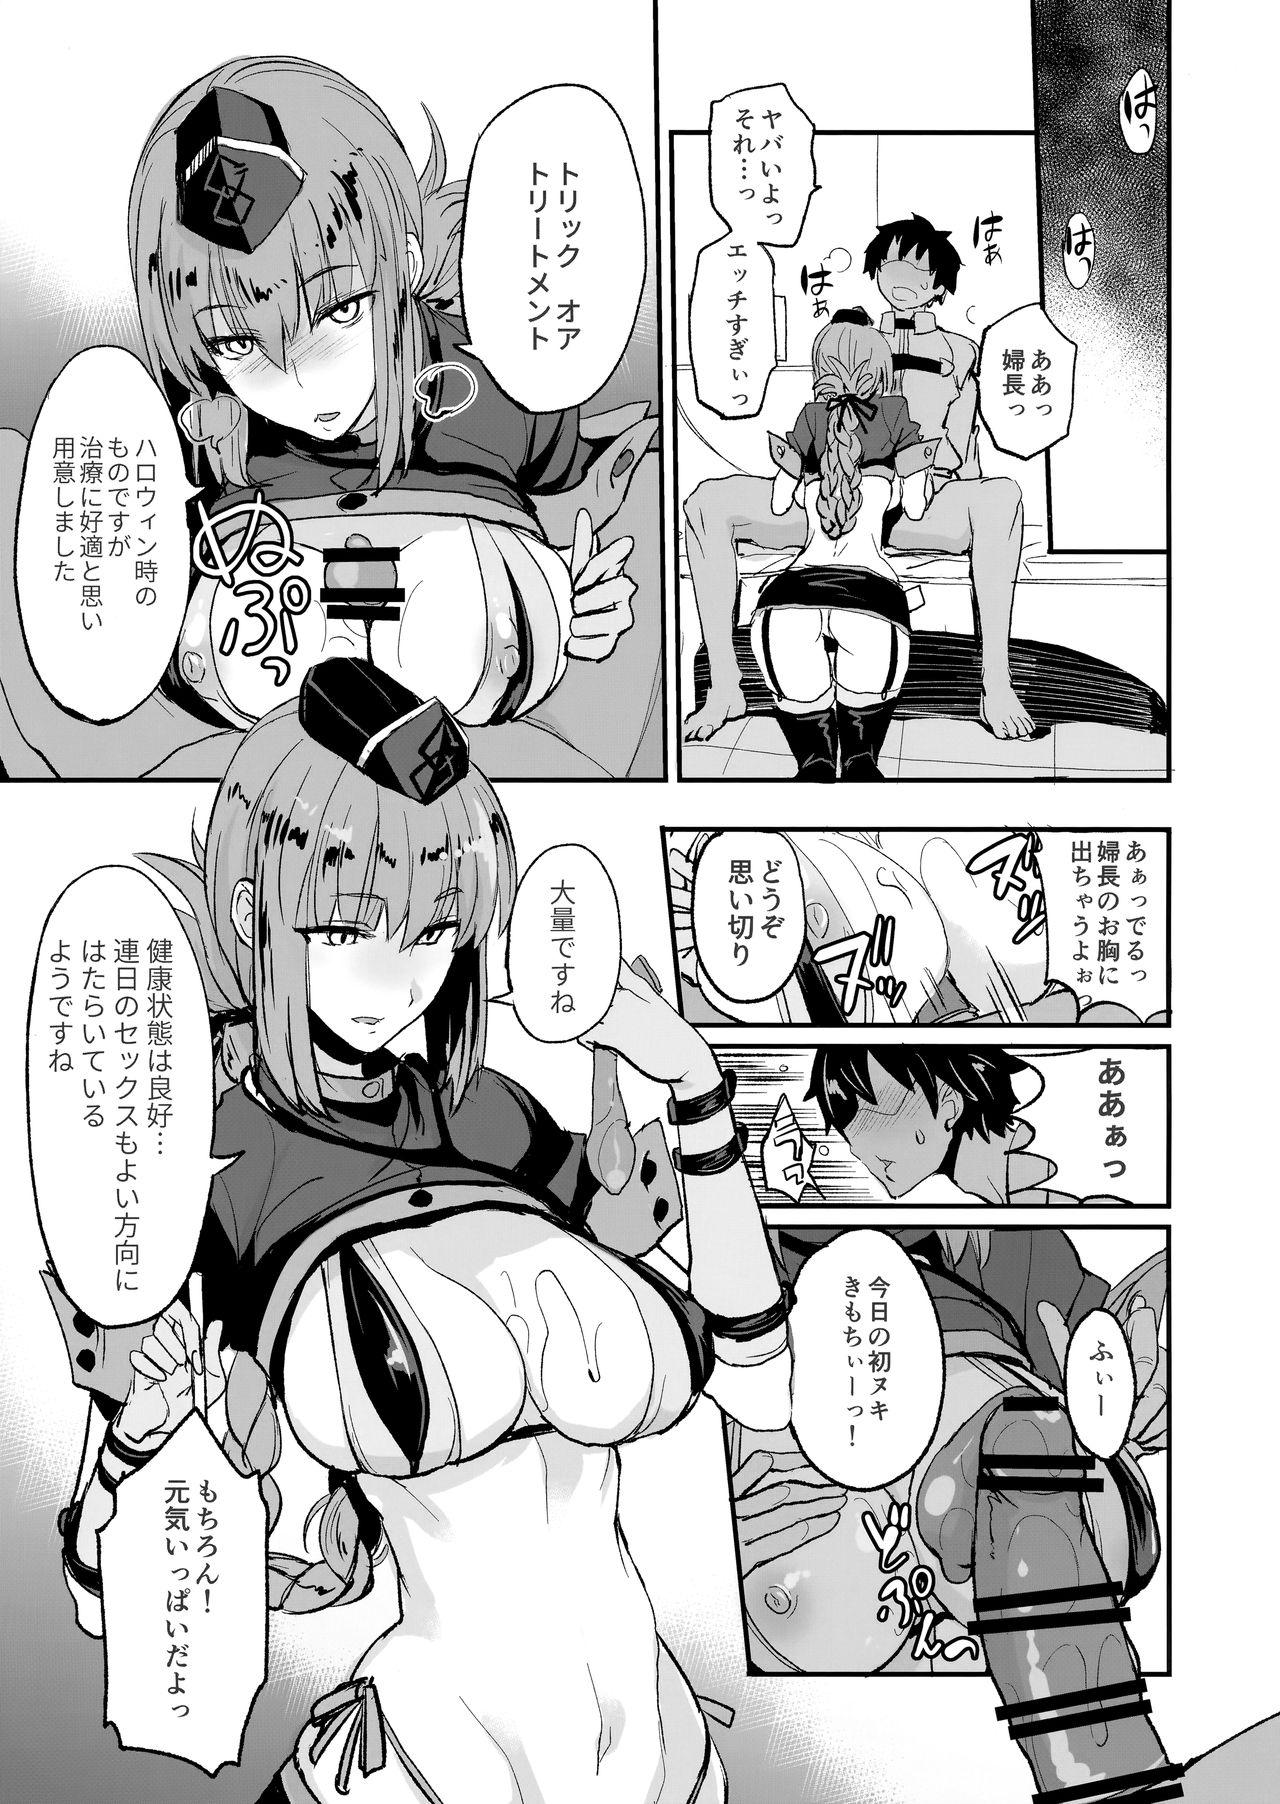 Eng Sub FGO no Erohon 2 - Fate grand order Ball Busting - Page 4